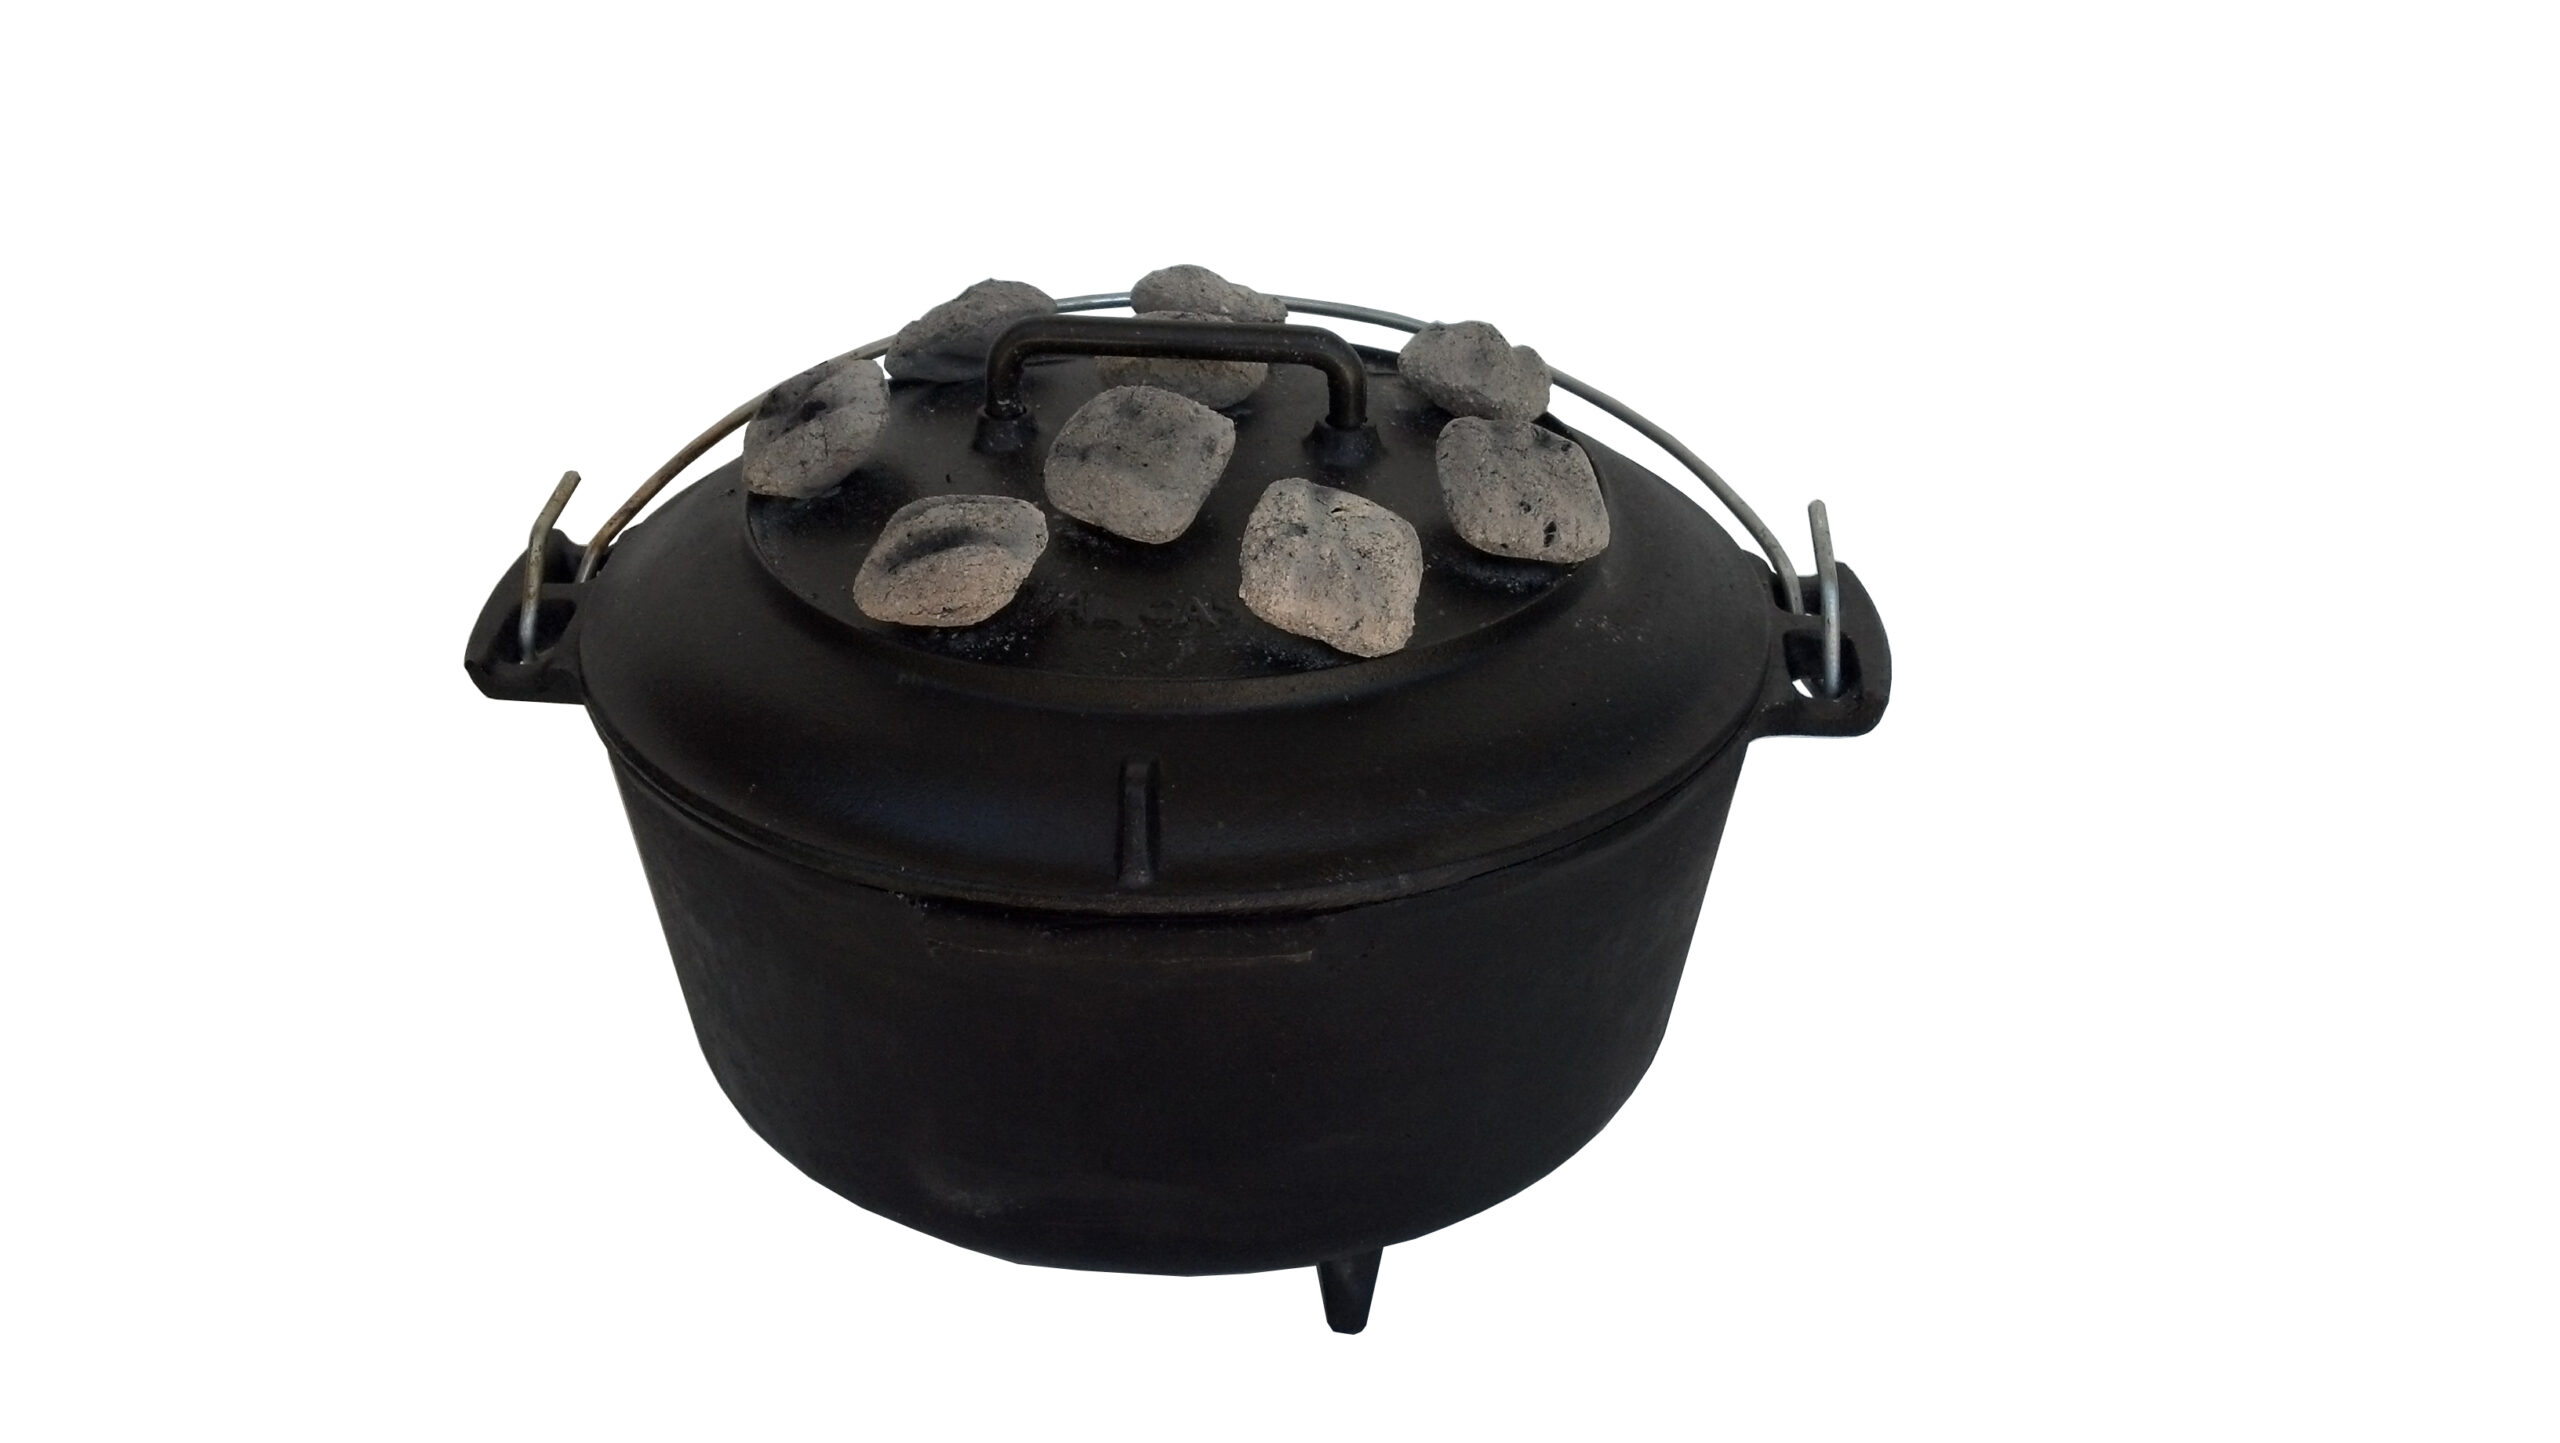 https://volcanogrills.com/wp-content/uploads/2019/01/DO-with-briquettes-scaled.jpg